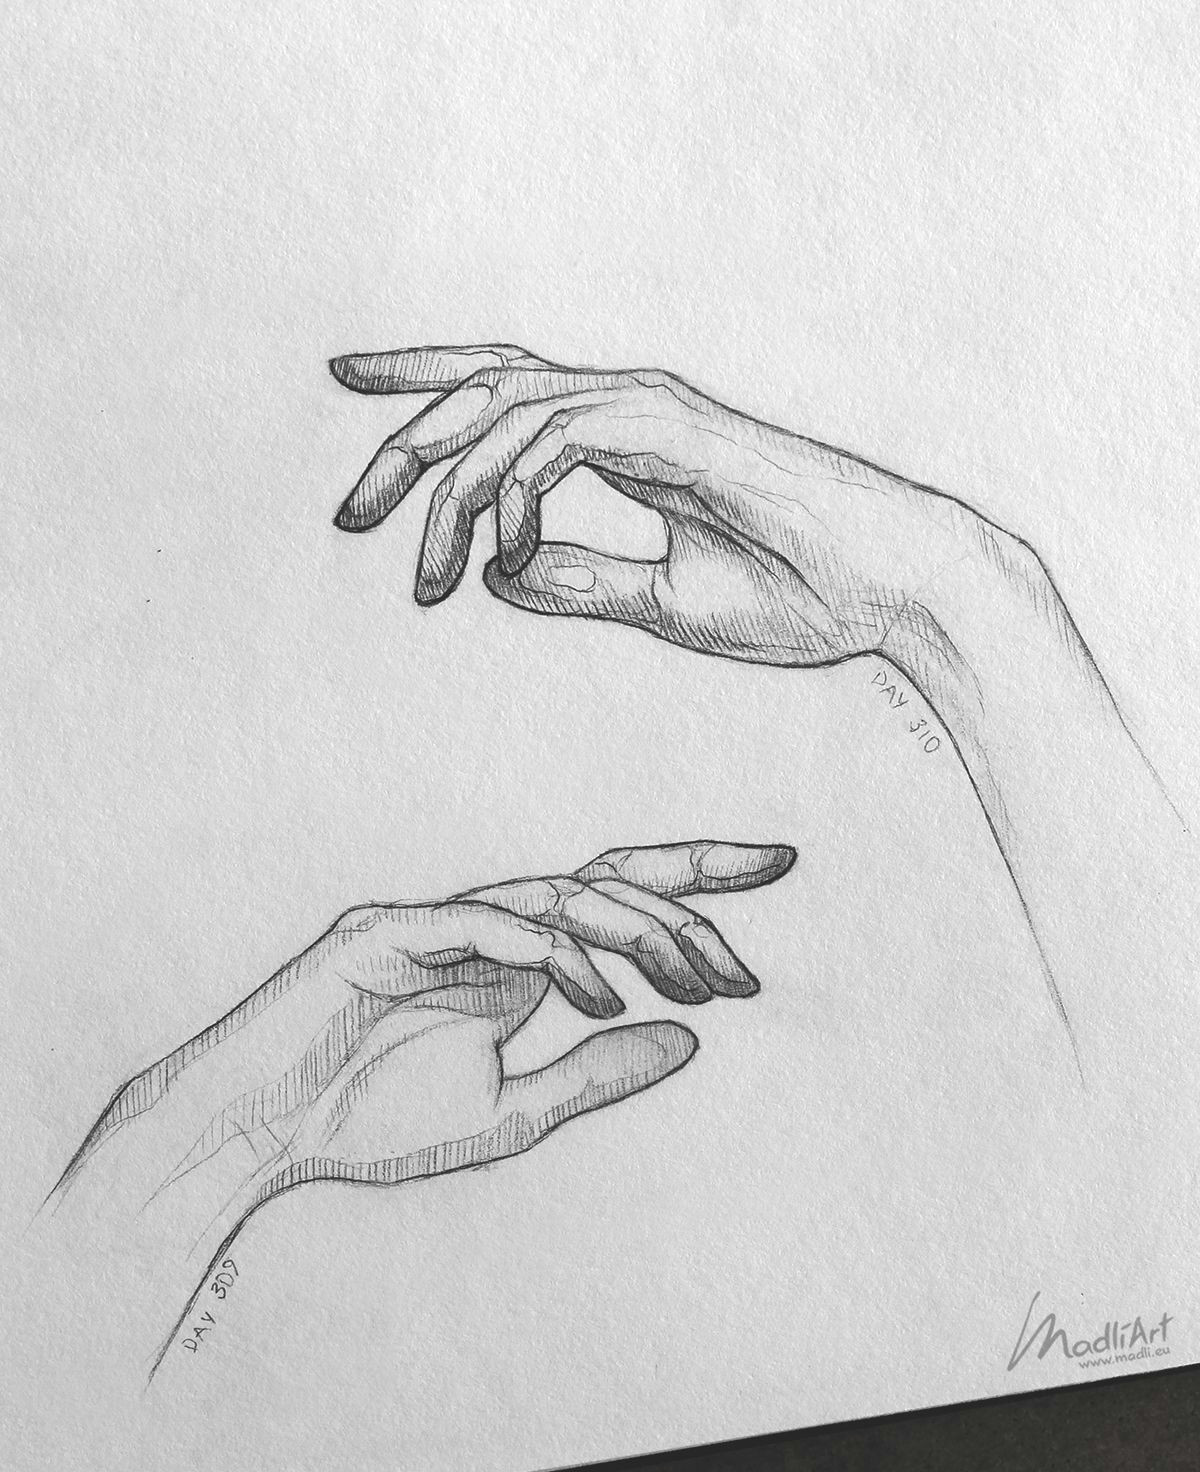 Drawing On Hand Ideas Sketchbook Drawing Of Hands Close Up I Pencil Art Idea I